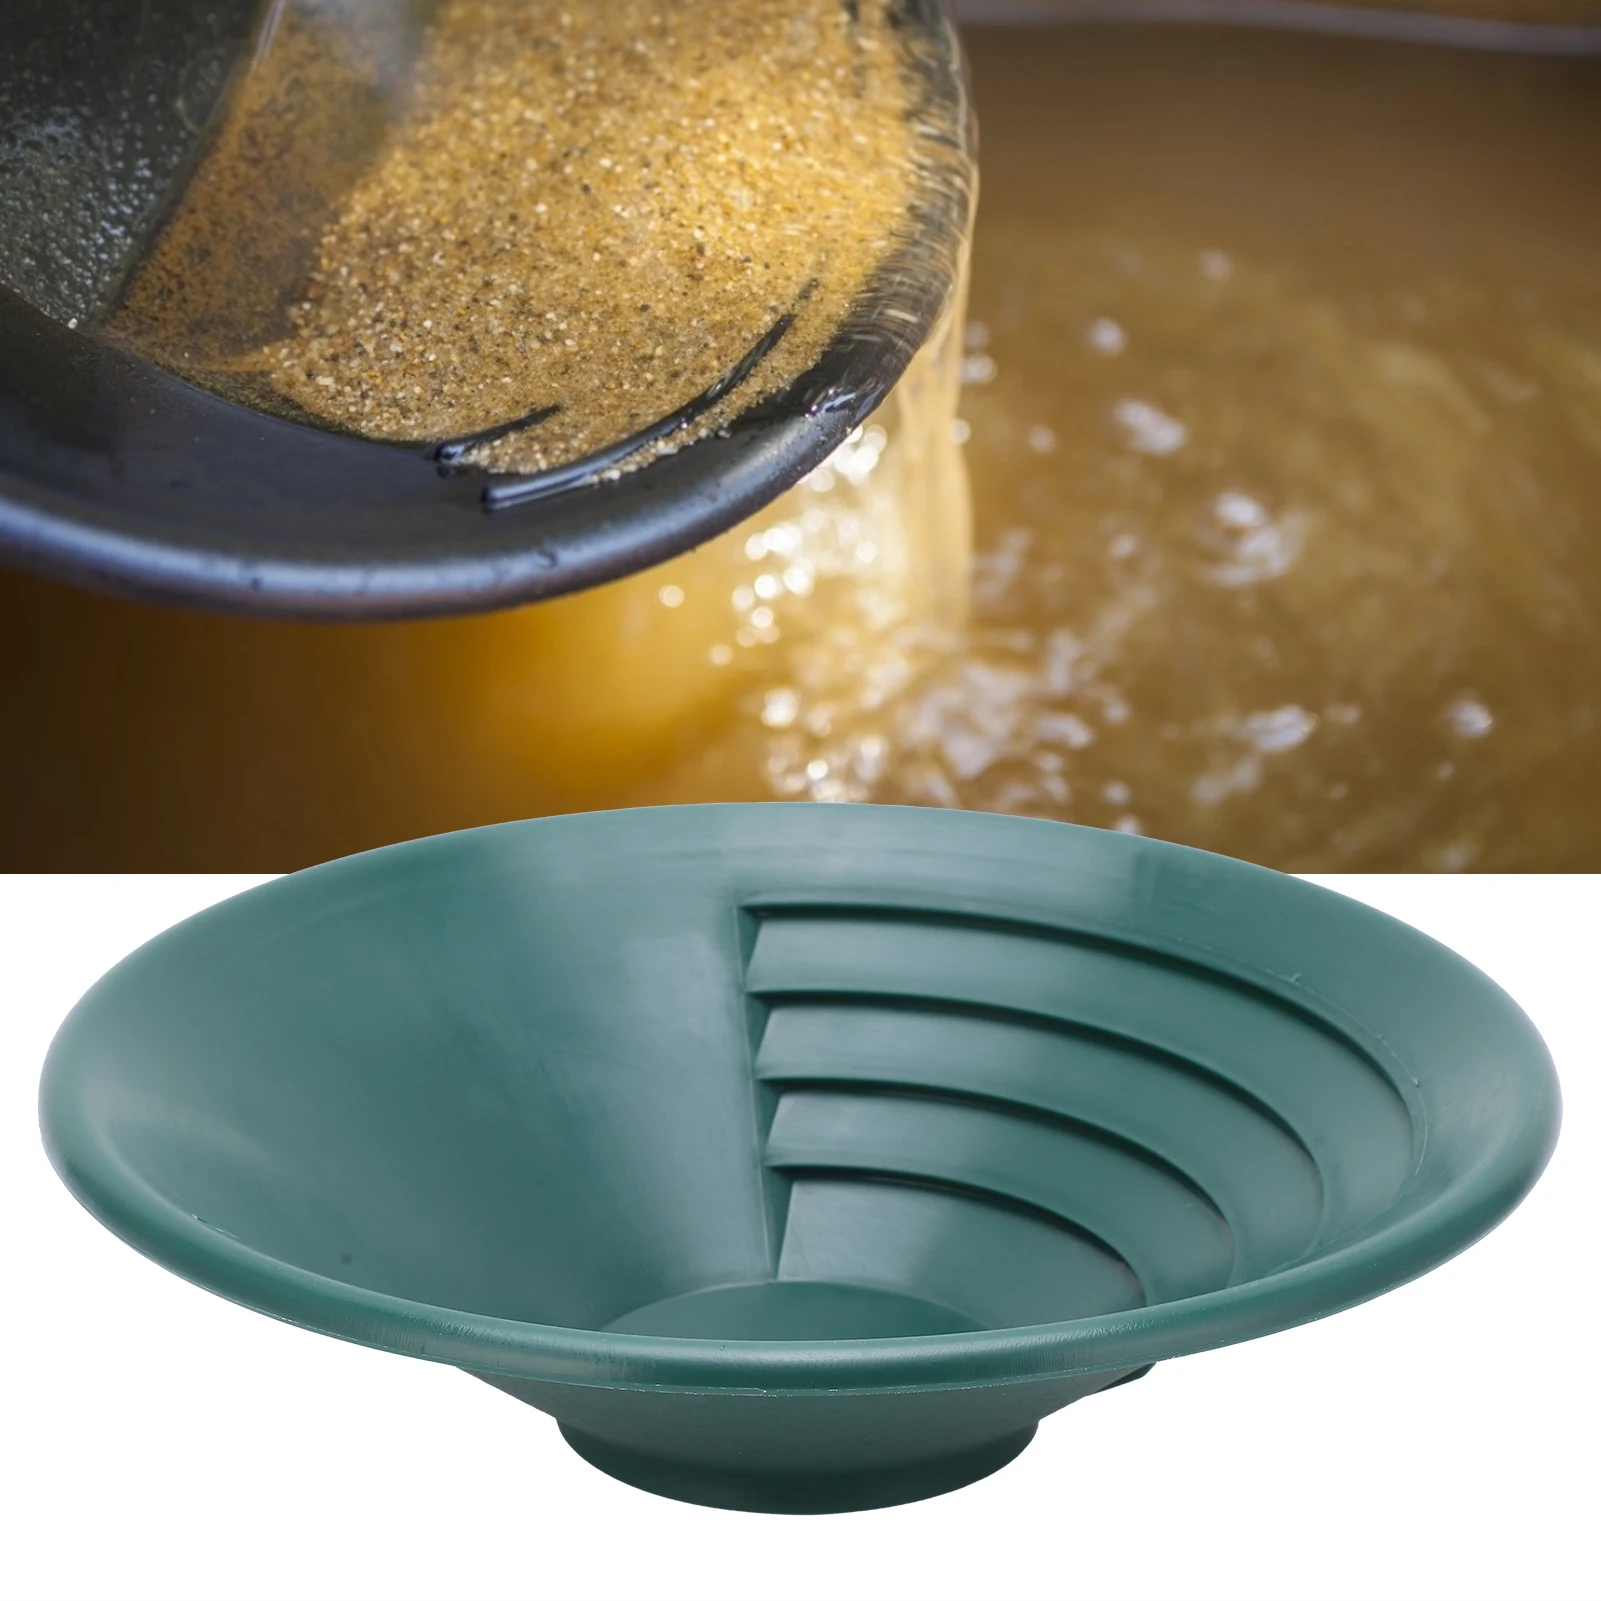 

1pc Plastic Gold Pan Basin Nugget Mining Dredging Prospecting For Sand Gold Mining Manual Wash Gold Panning Equipment